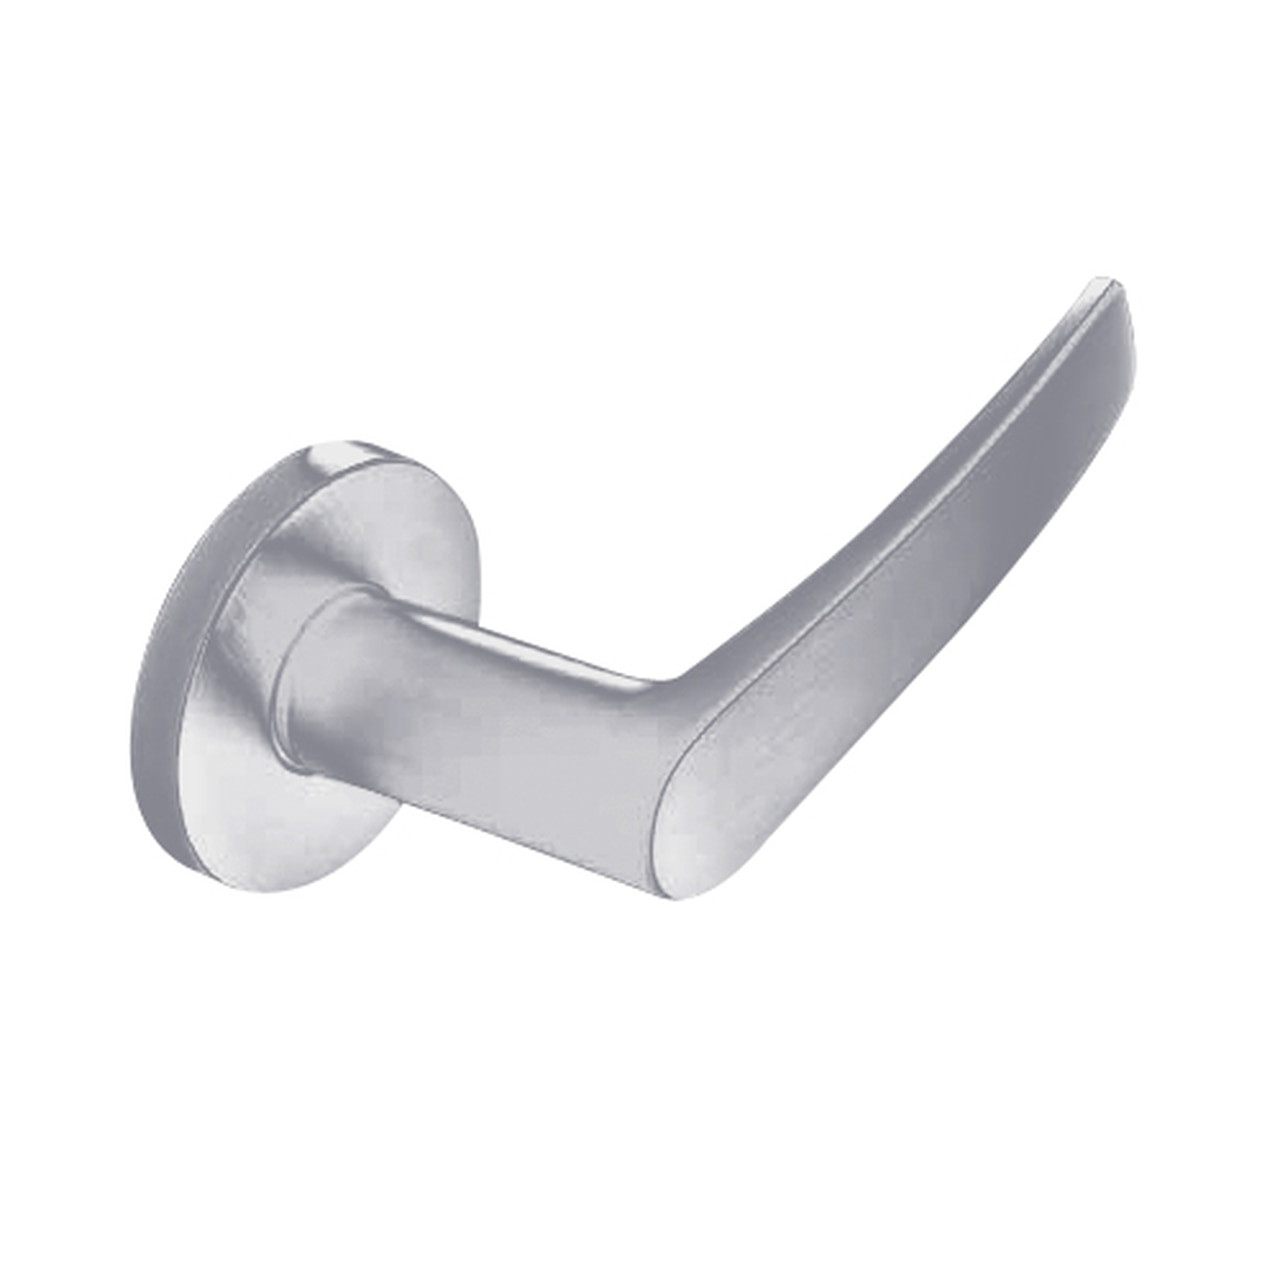 ML2057-ASB-626-M31 Corbin Russwin ML2000 Series Mortise Storeroom Trim Pack with Armstrong Lever in Satin Chrome